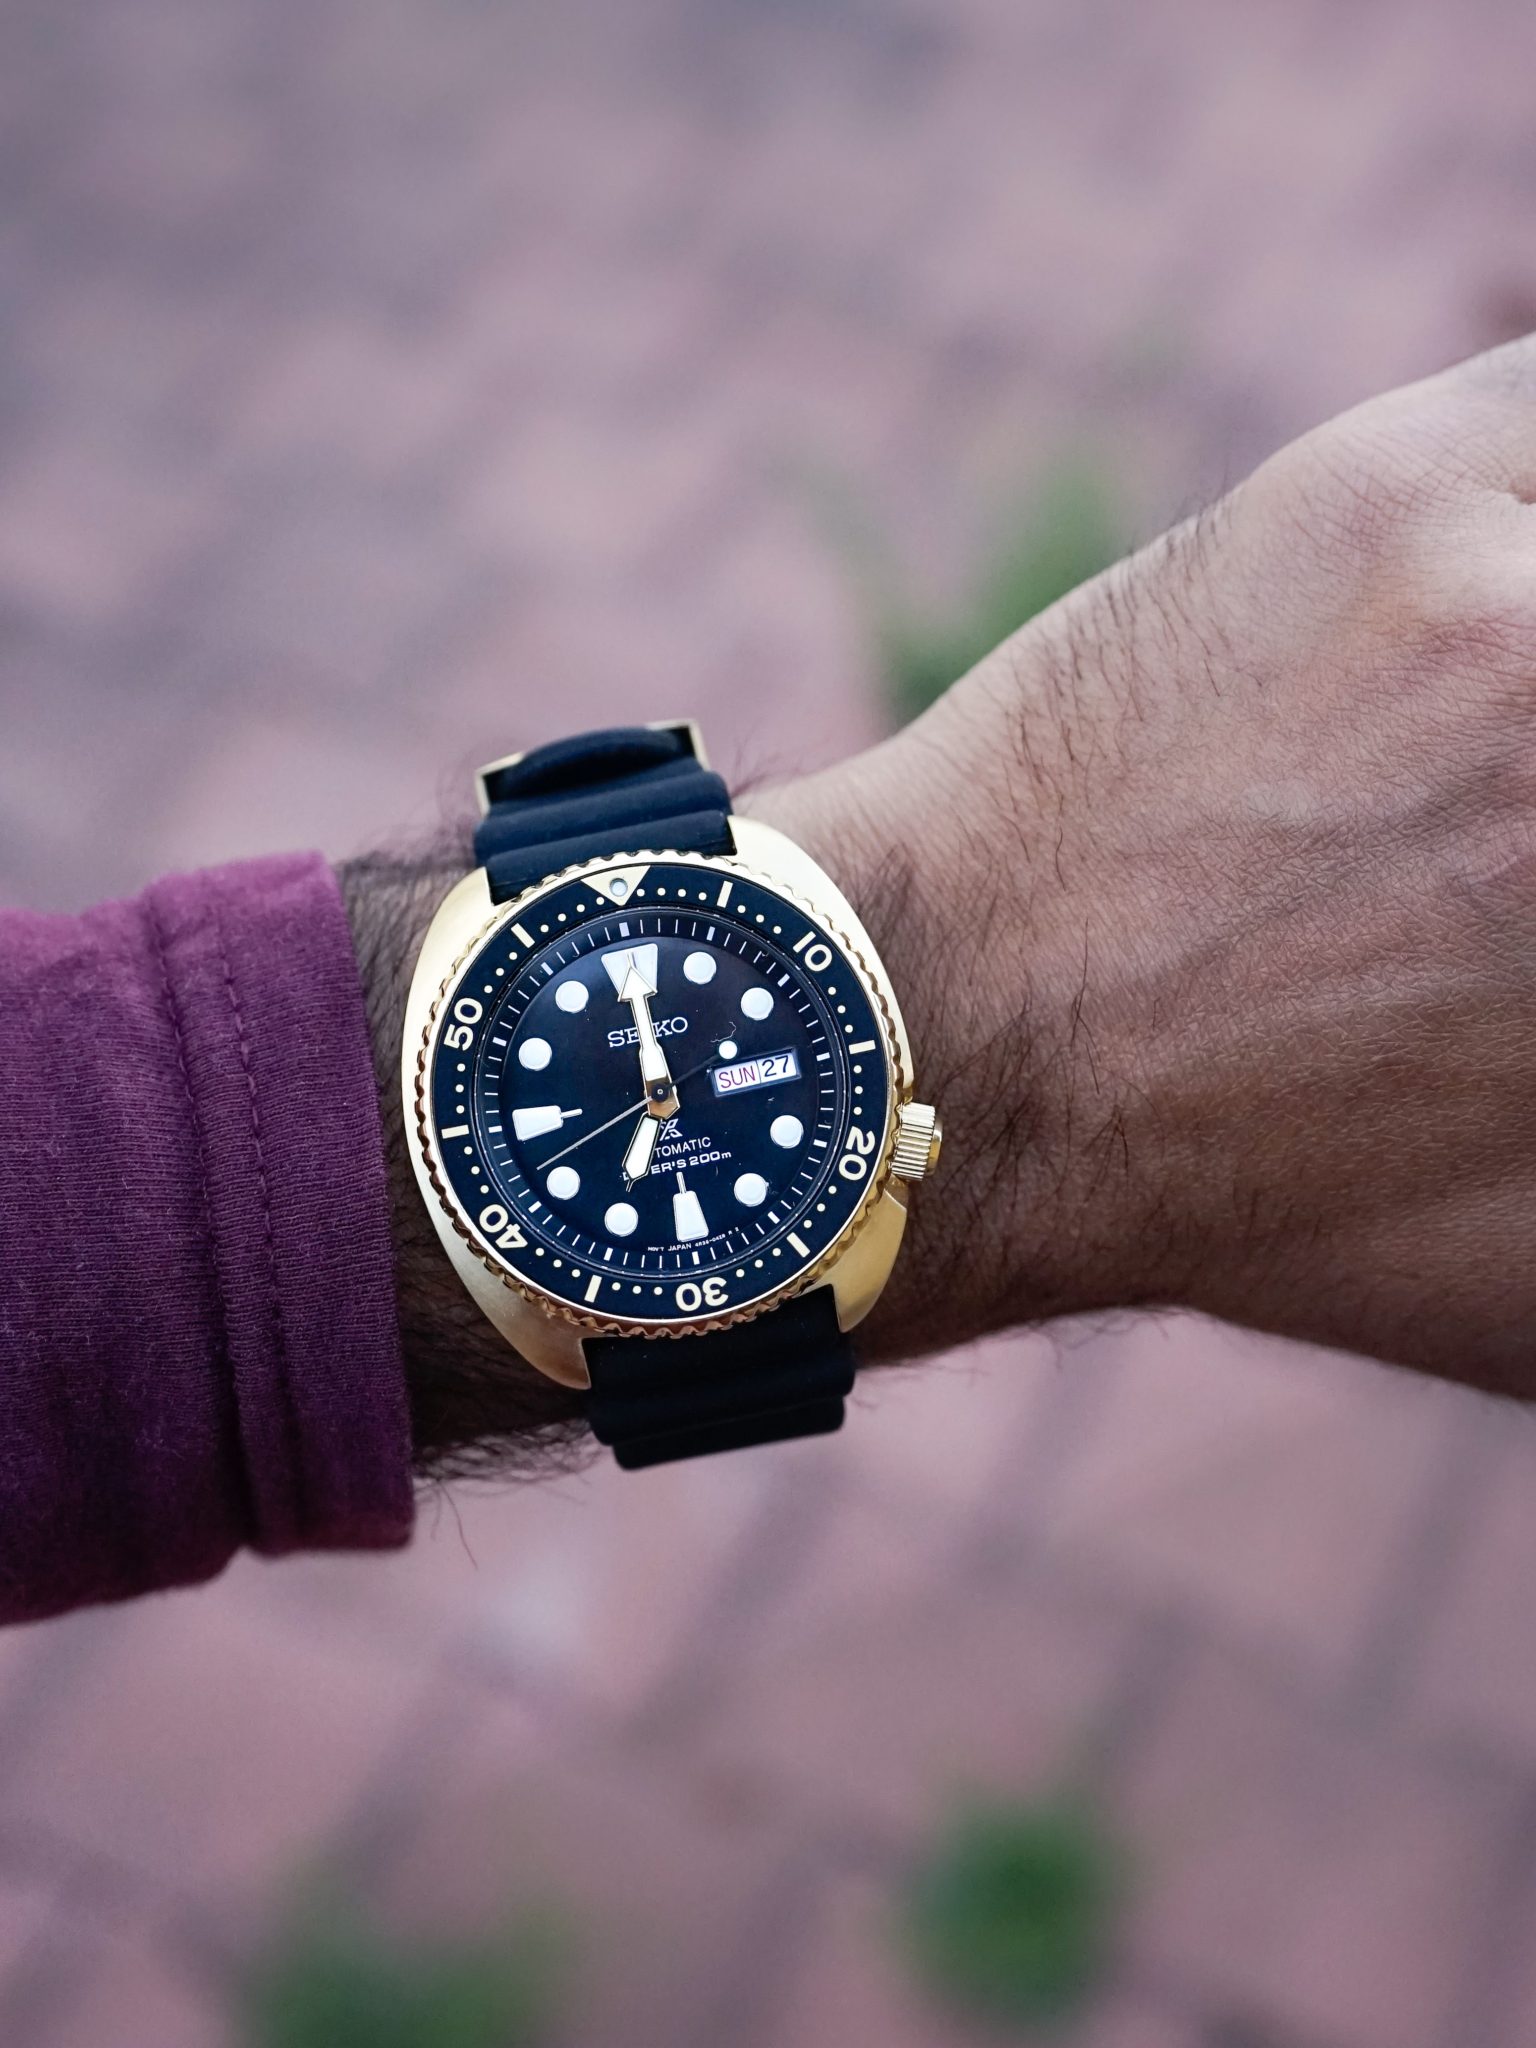 Hands-On: The Seiko Prospex SRPC44, A Healthy Dose Of Golden